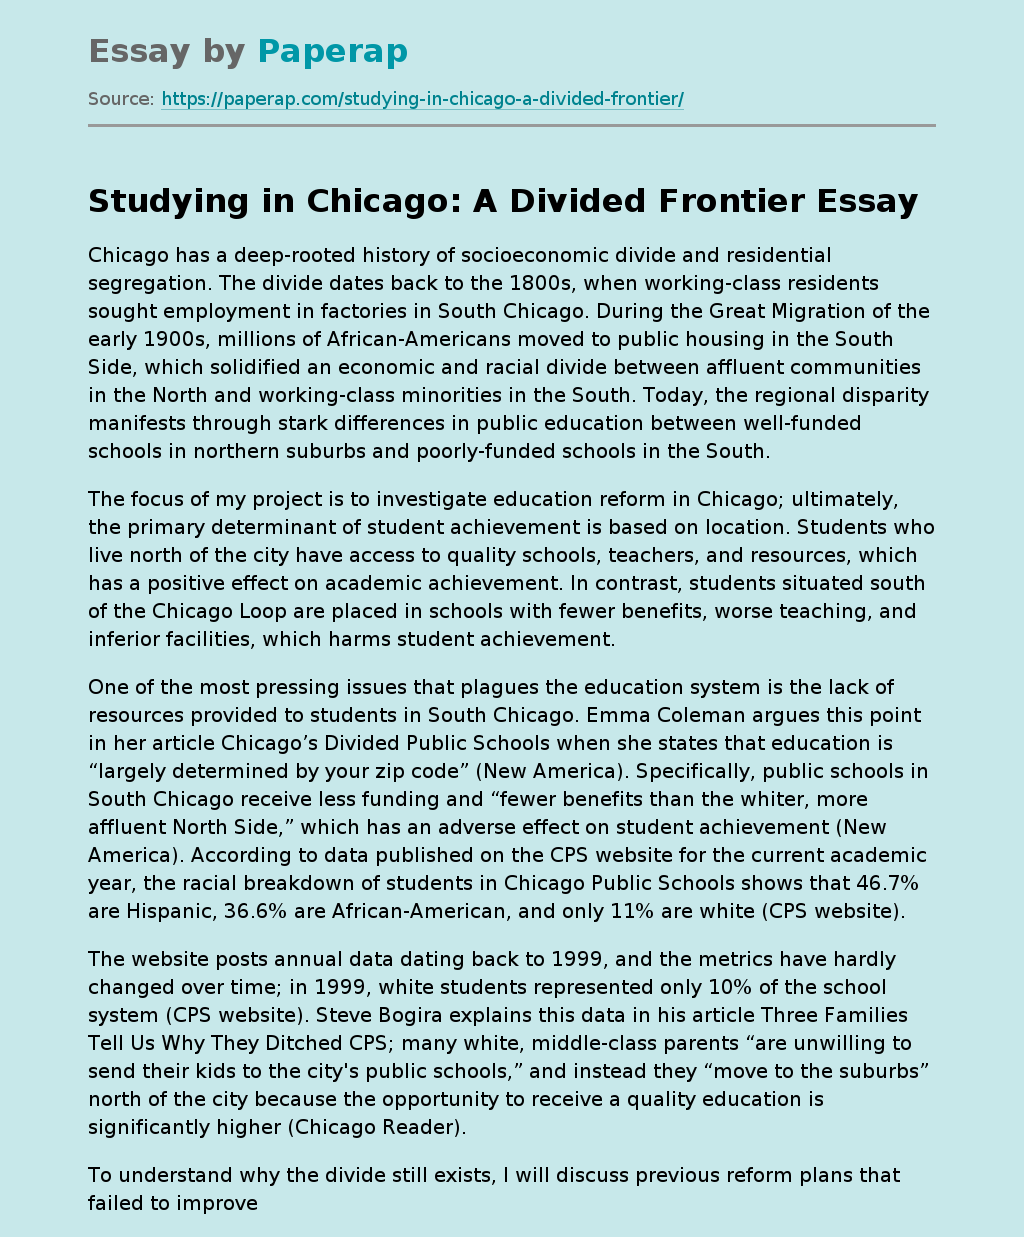 Studying in Chicago: A Divided Frontier